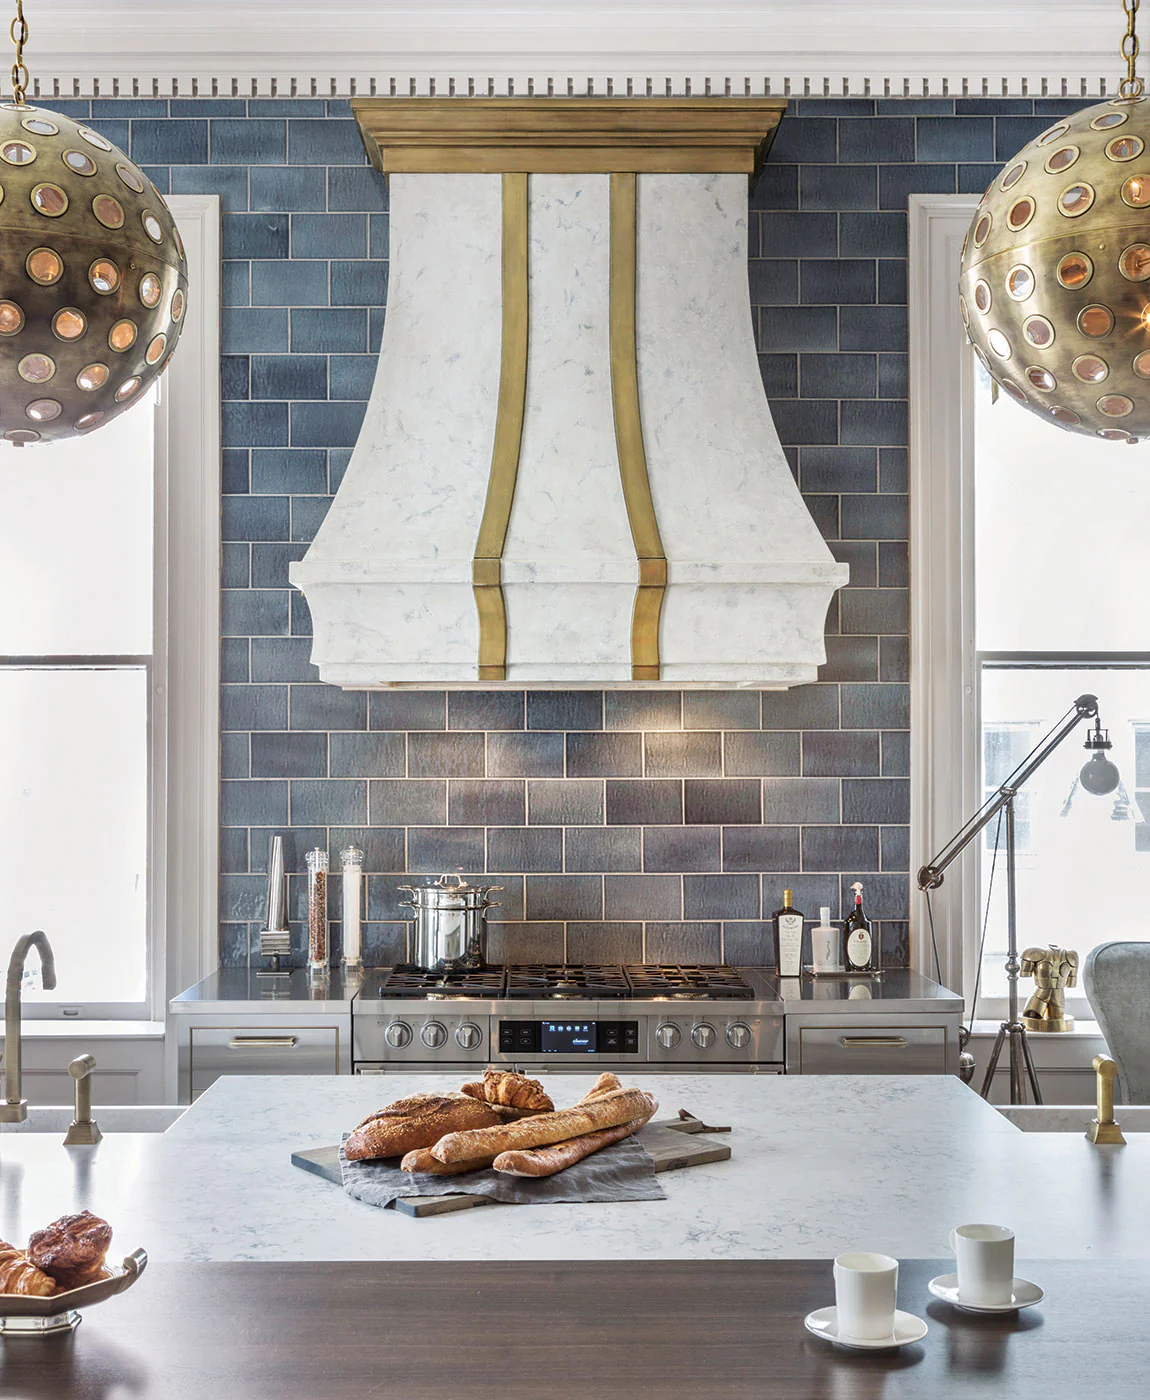 A marble and gold range hood in a kitchen with blue tiled backsplash.